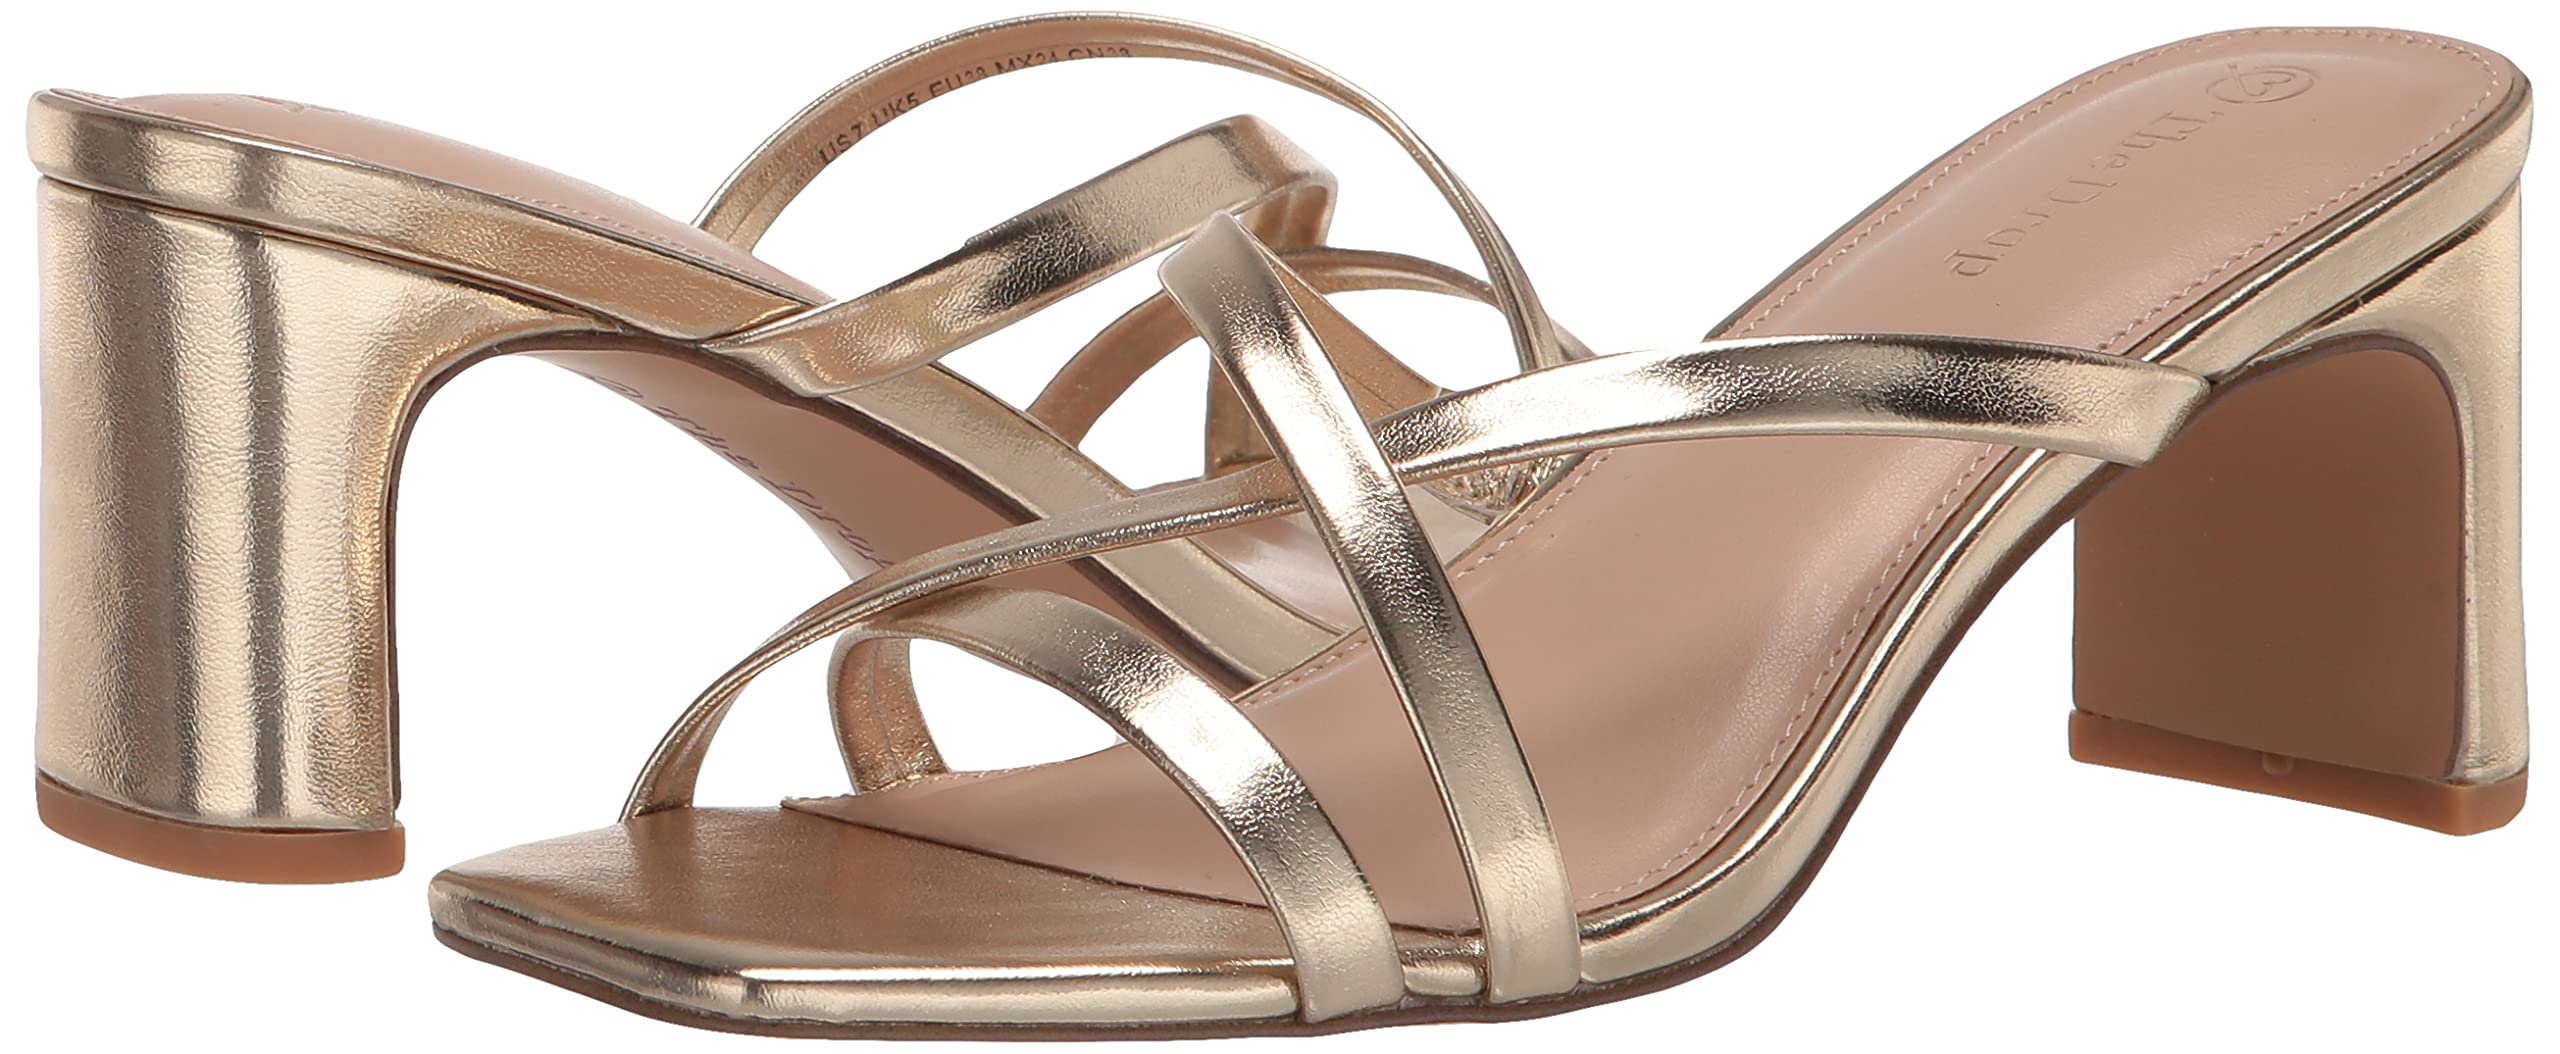 The Drop Women's Amelie Strappy Square-Toe Heeled Sandal